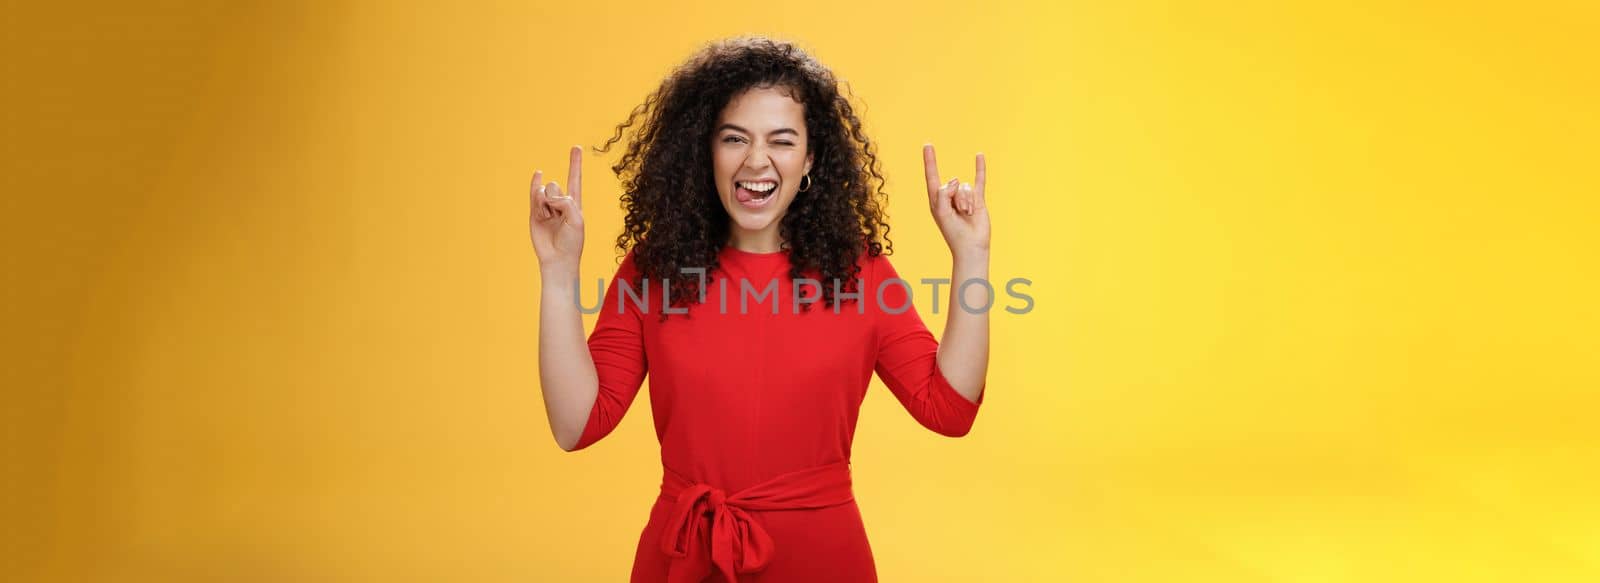 Lifestyle. Cute excied and daring woman in 25s sticking out tongue as fooling around having fun on concert winking joyfully and showing rock-n-roll gesture feeling amused and alive over yellow background.